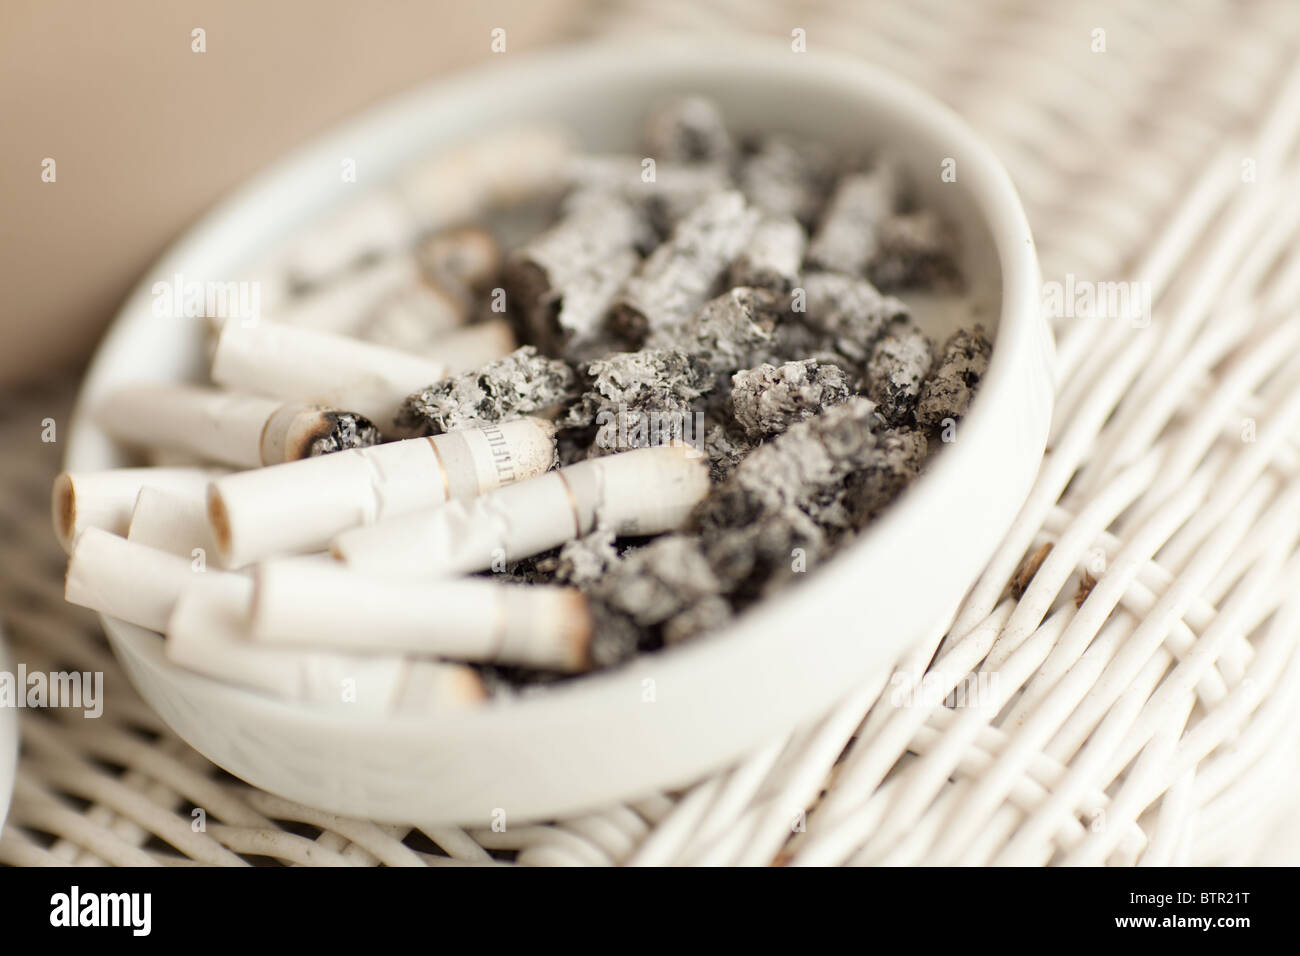 Selective focus photo of white cigarette butts in white ash tray. Stock Photo